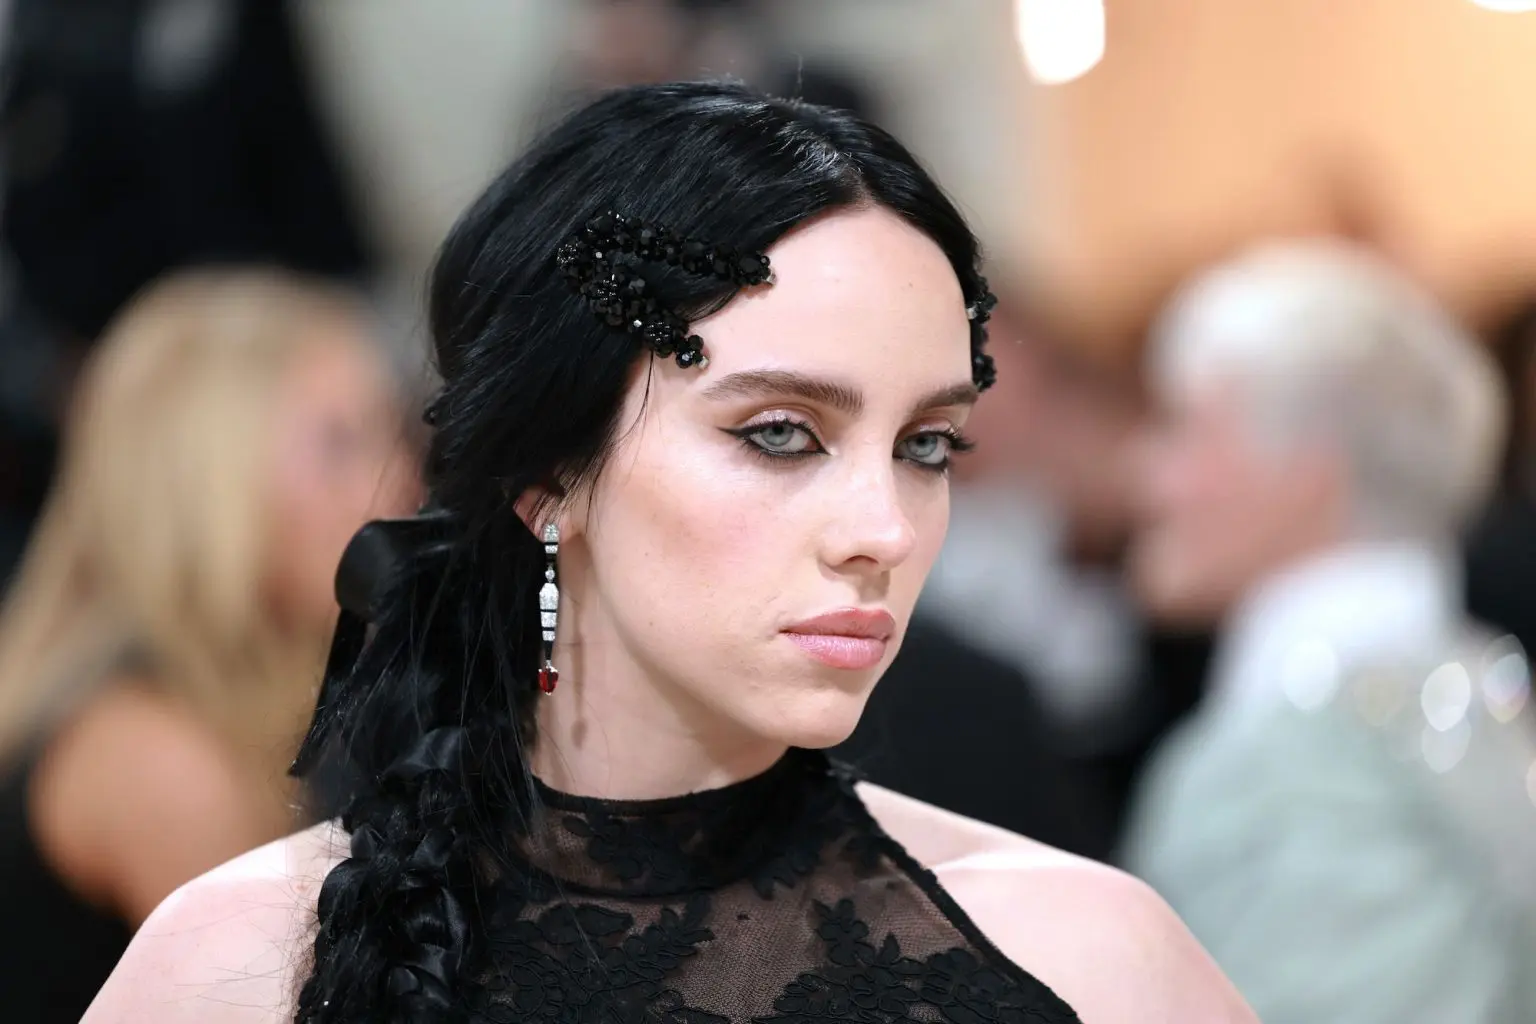 Why I have 1,993 unread texts on my phone – Billie Eilish